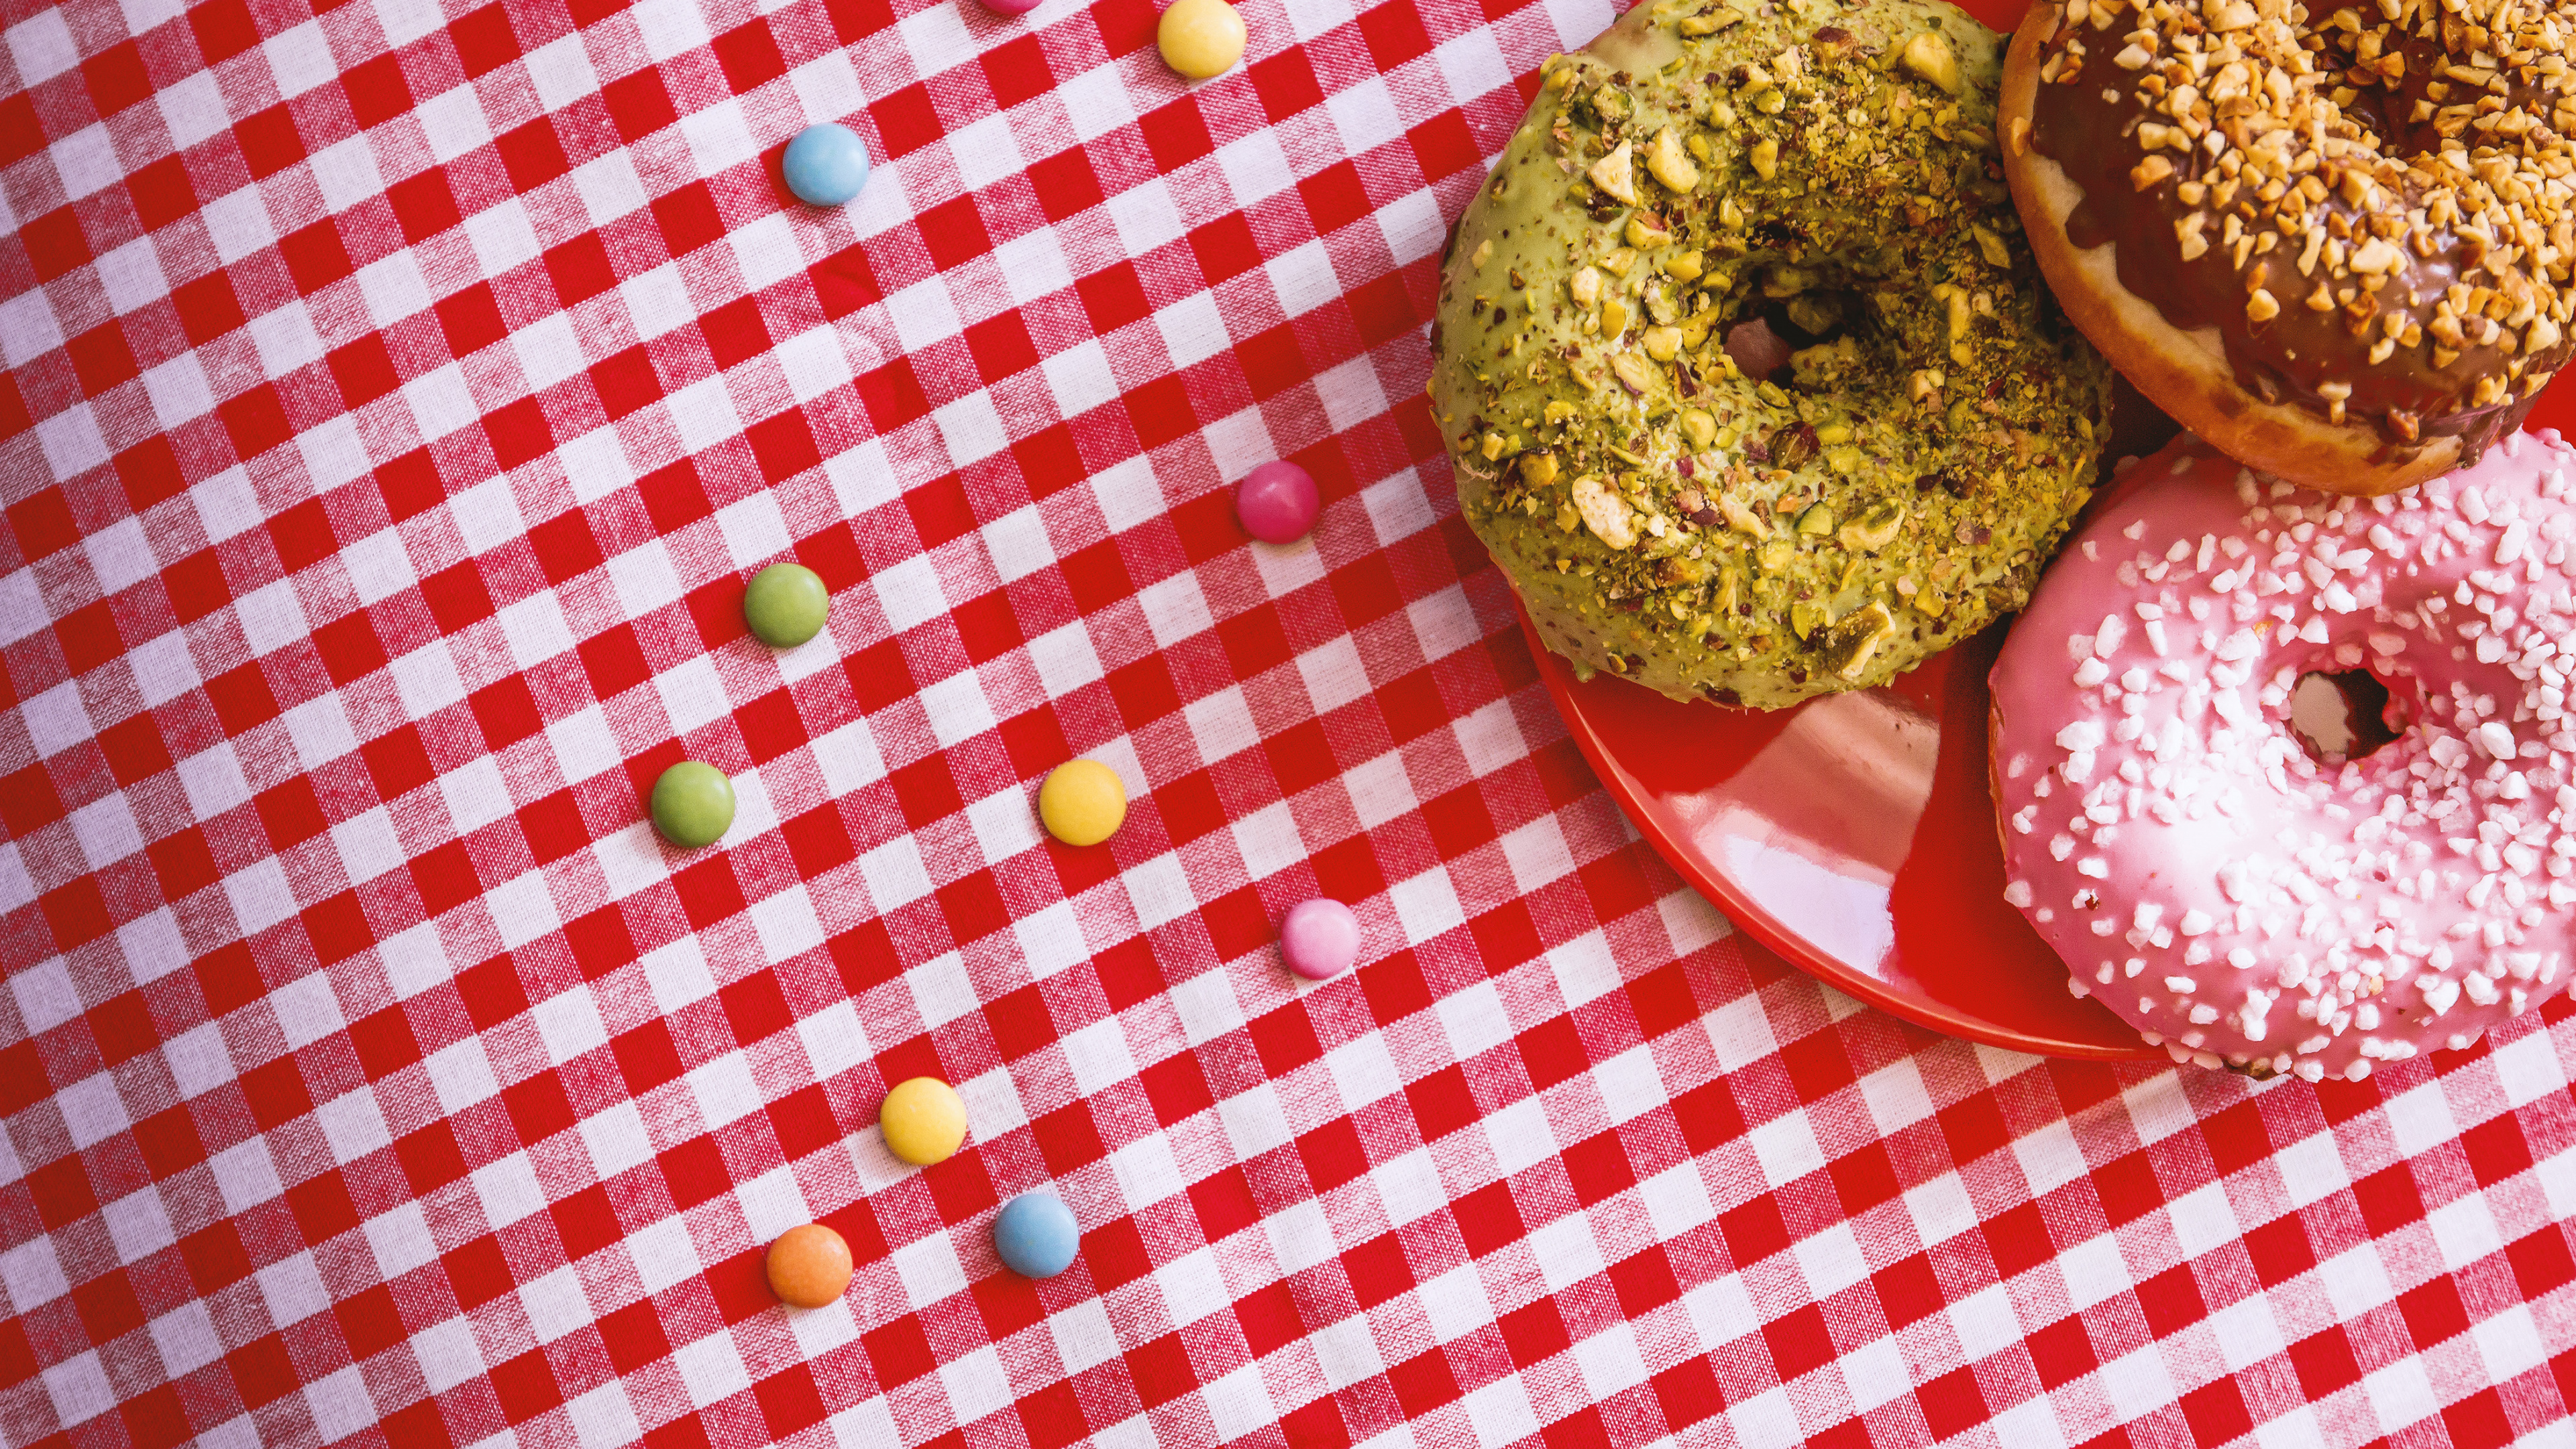 Brown Doughnut on Red and White Checkered Table Cloth. Wallpaper in 3840x2160 Resolution